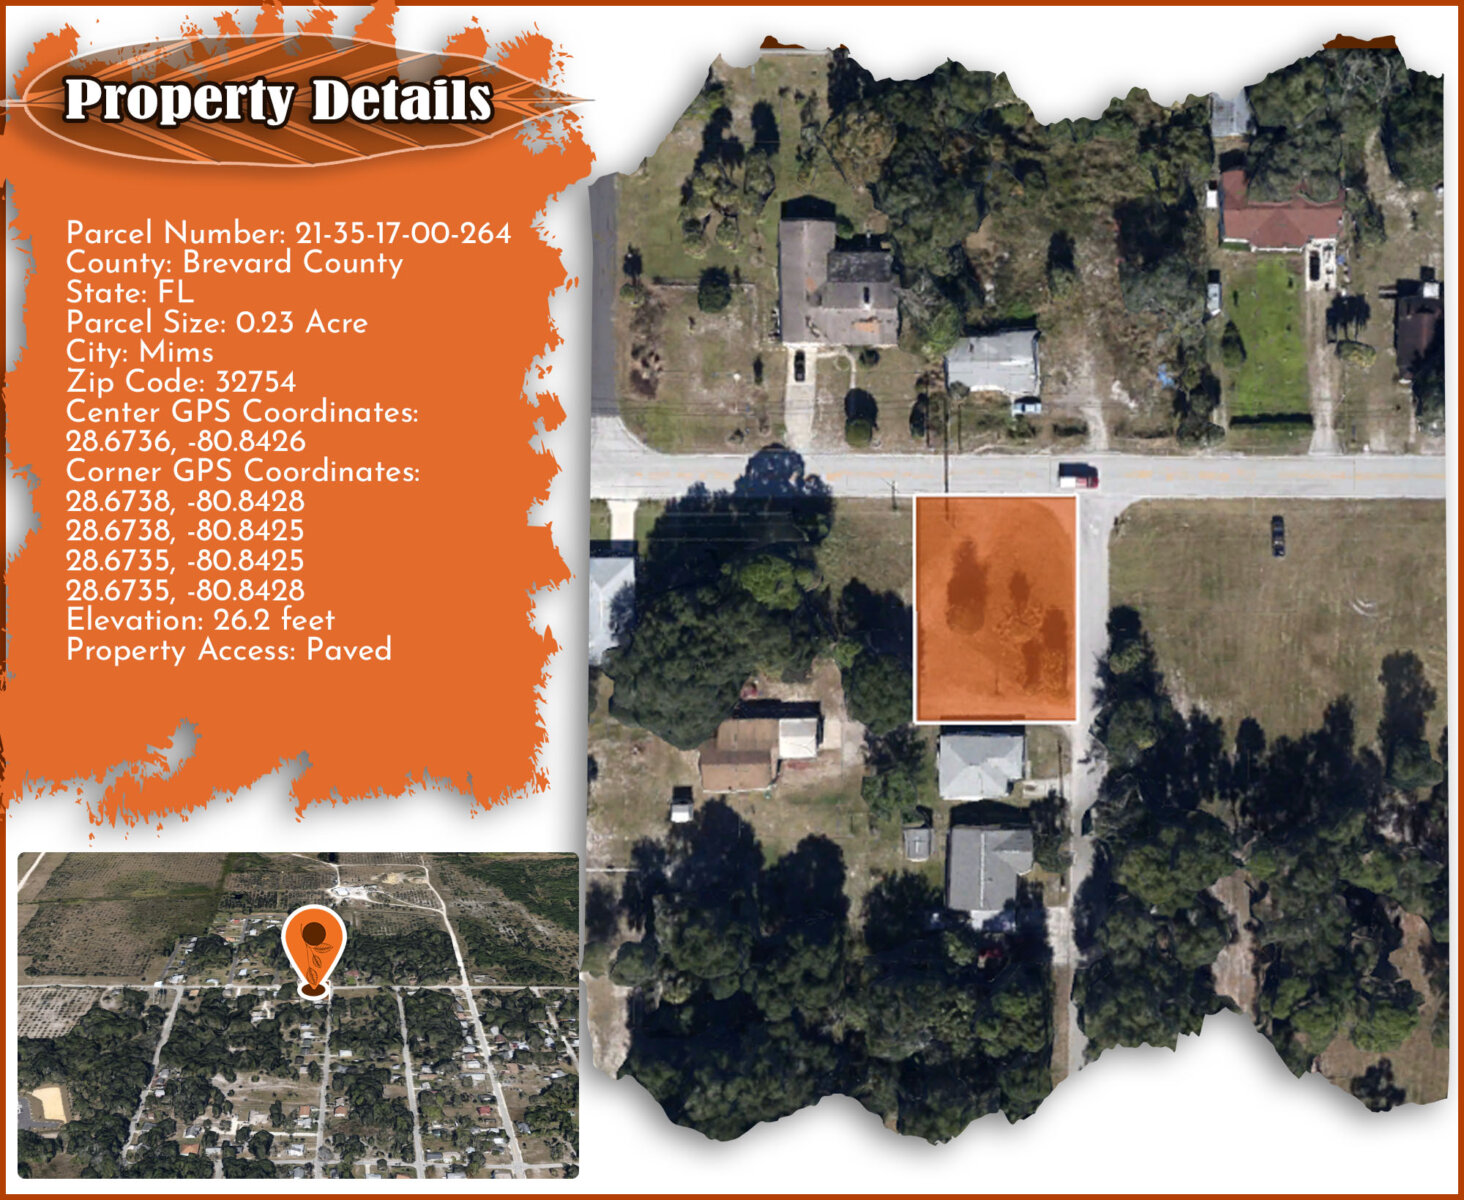 details of a property in brevard county